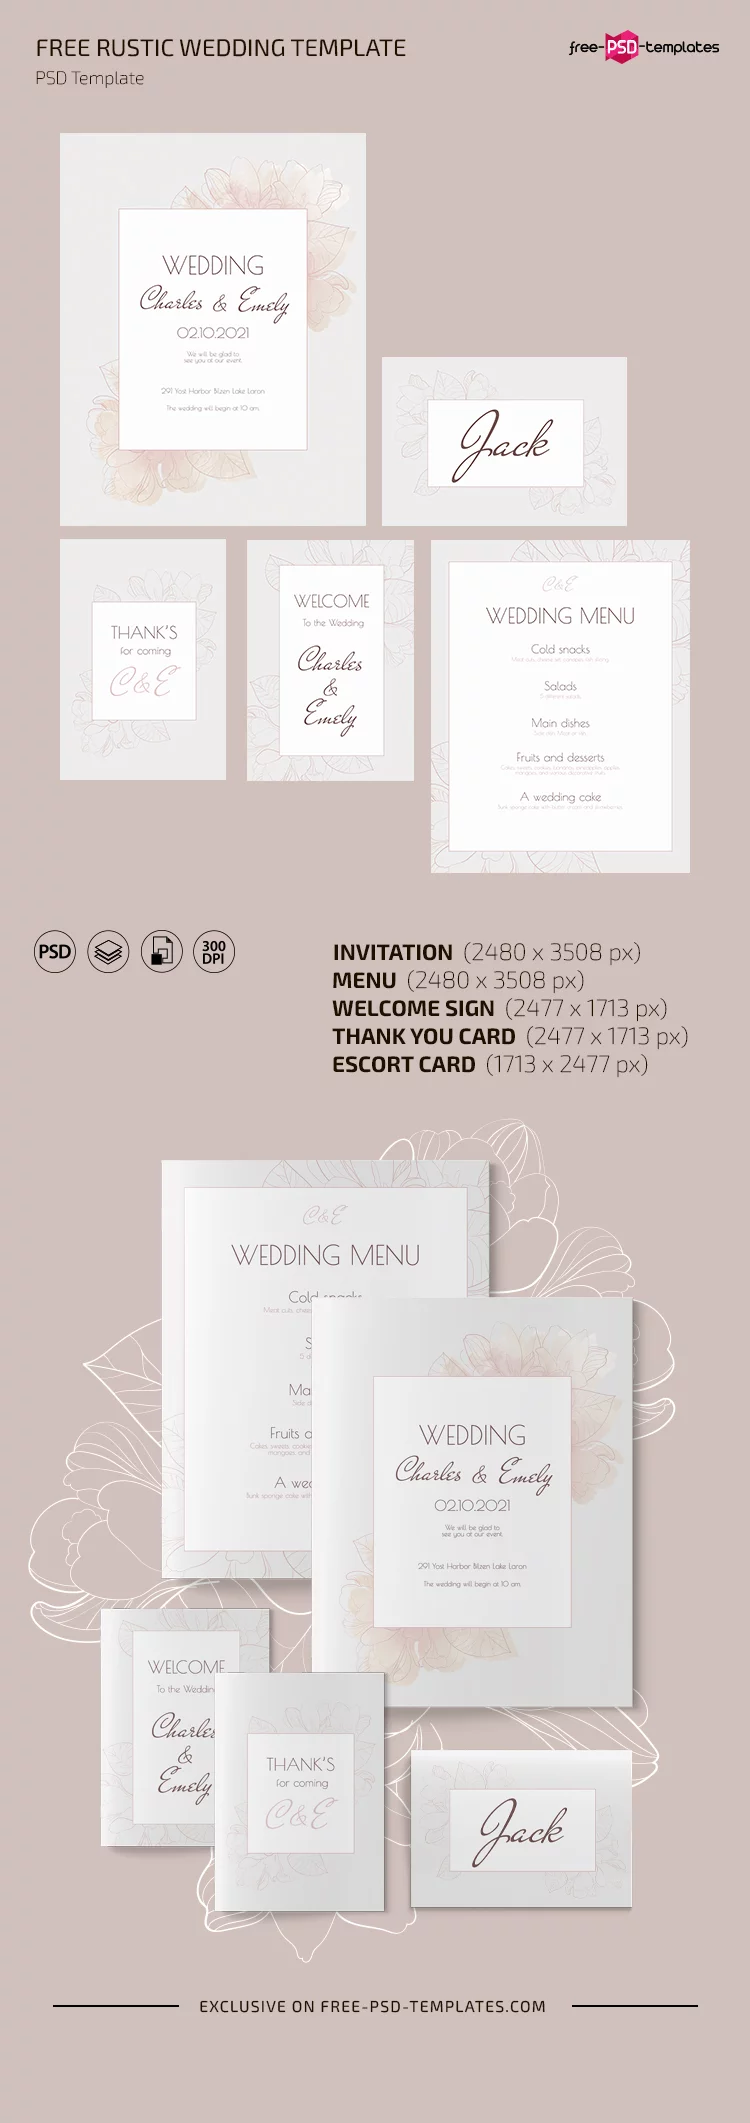 Free Rustic Wedding Template Set in PSD